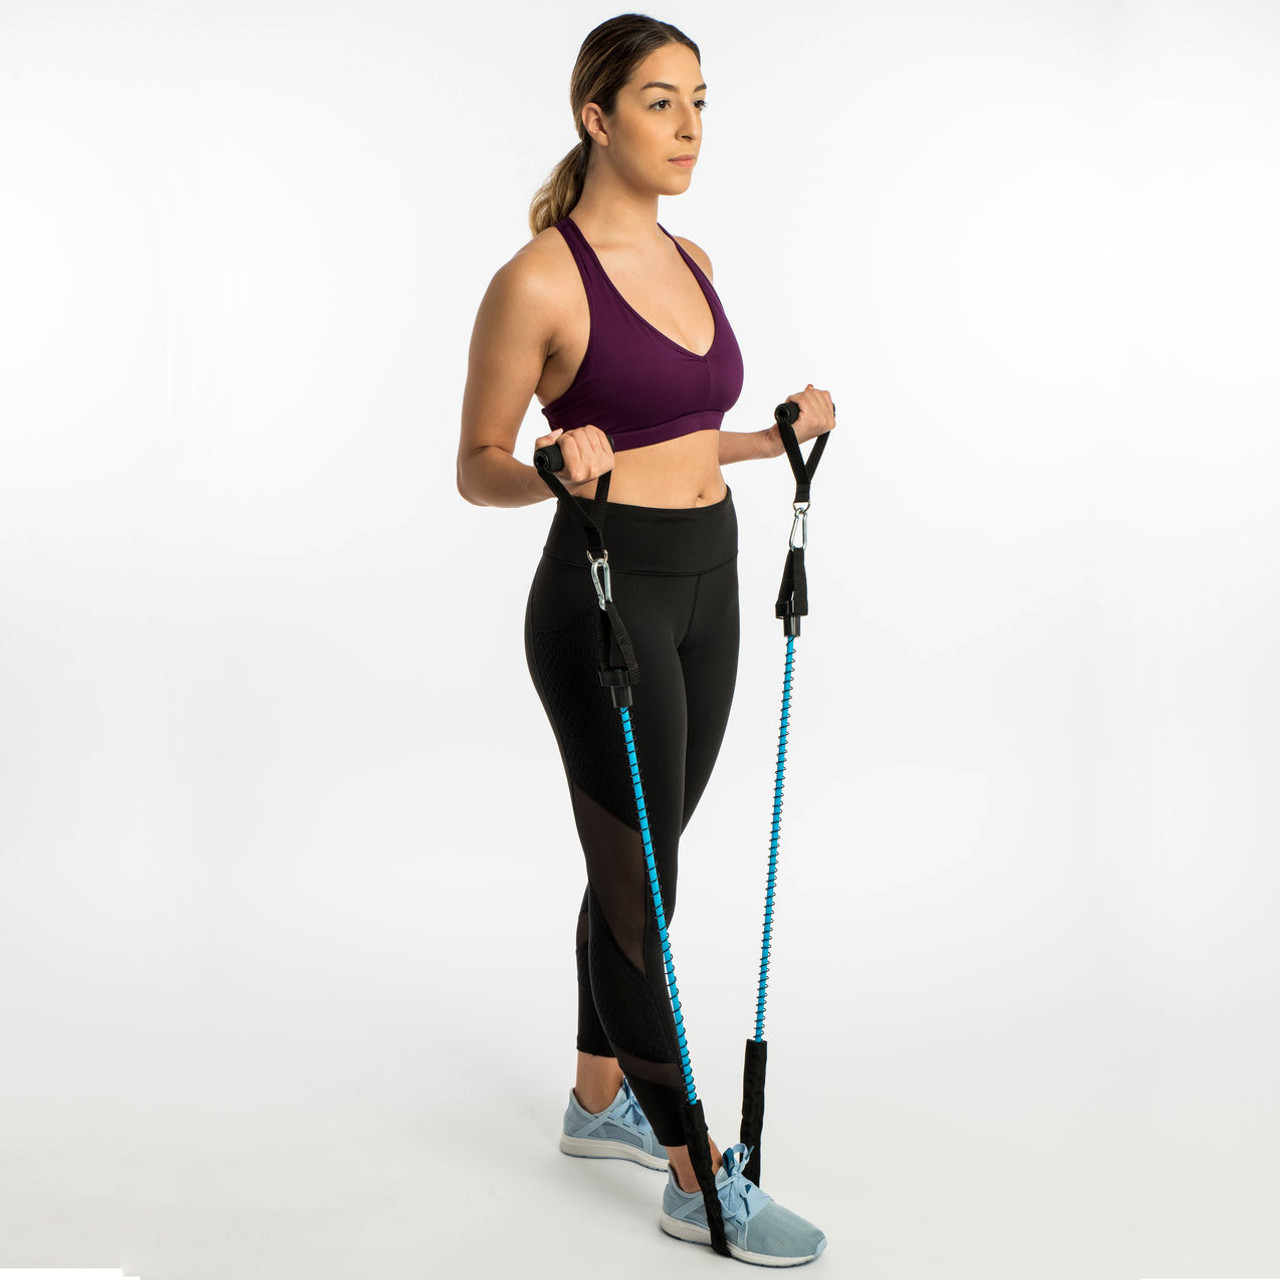 AEROMAT  Quality Fitness Products and Accessories – Aeromat/Ecowise